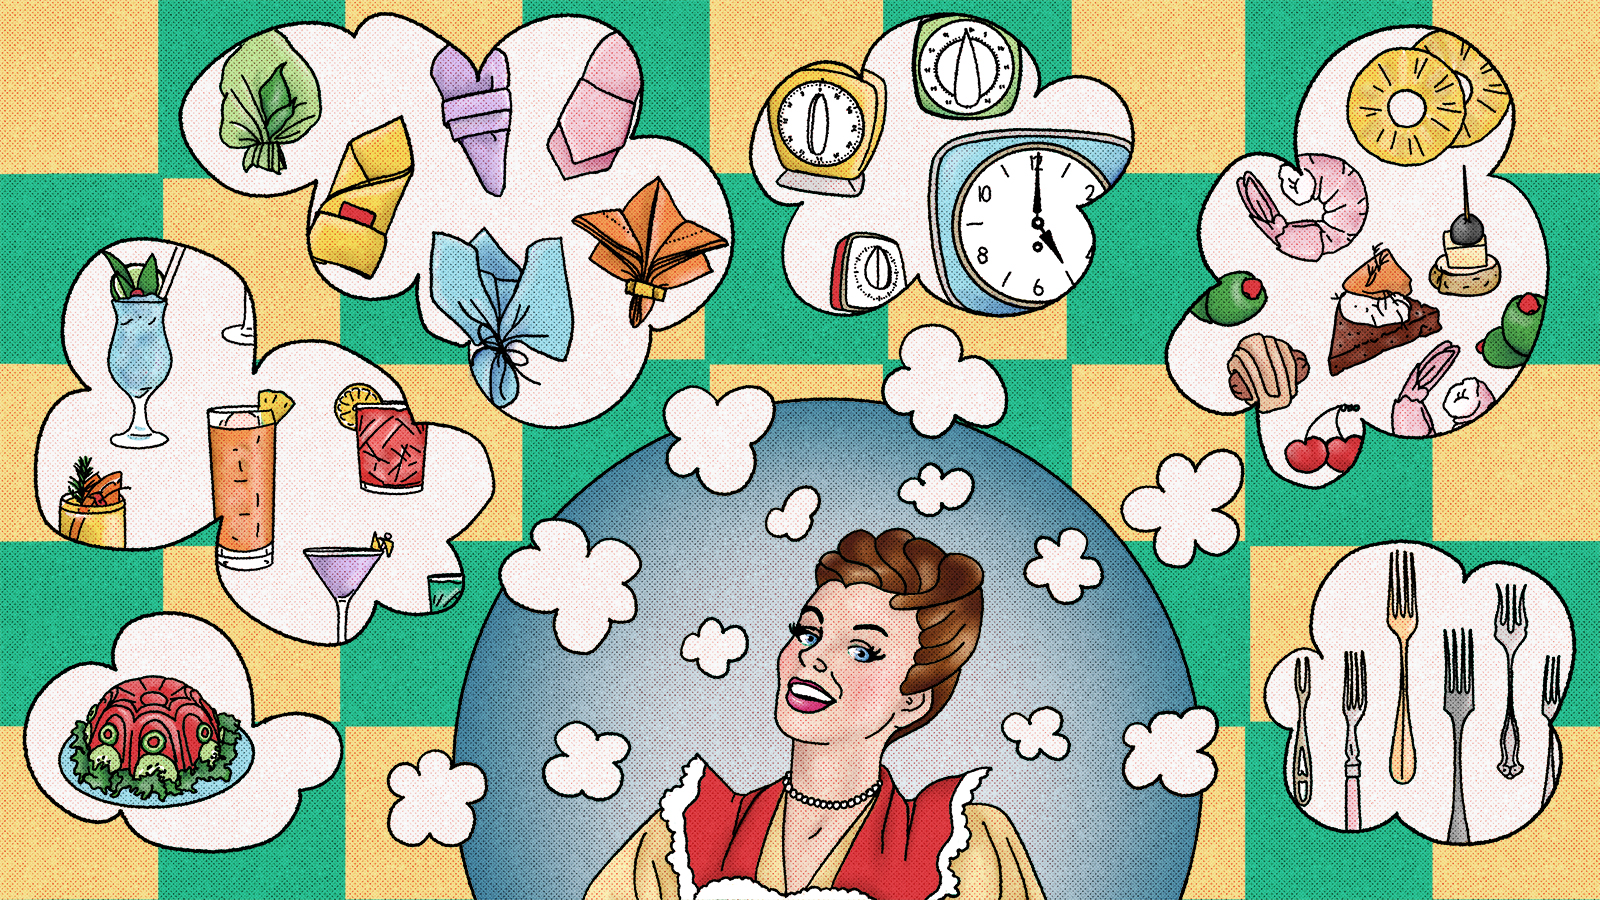 A 1950s-era woman surrounded by thought bubbles filled with folded napkins, different forks, kitchen timers, canapes, a jello mold, and cocktails. Illustration.